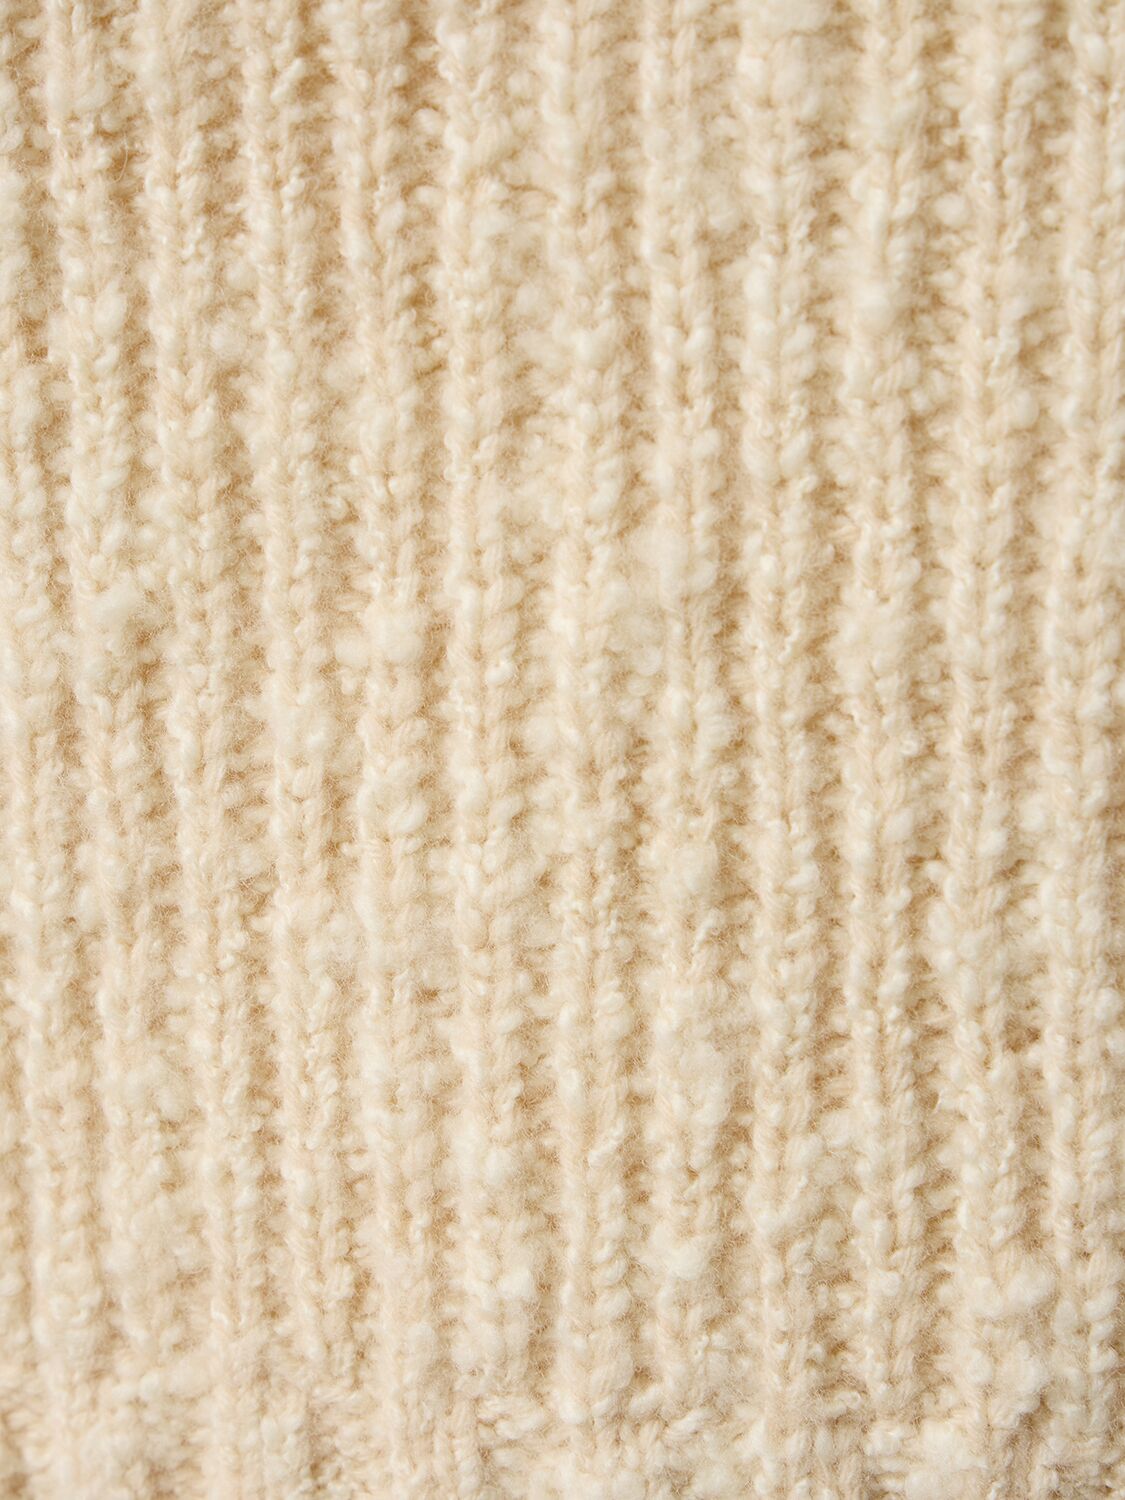 Shop Ami Alexandre Mattiussi Brushed Textured Wool Sweater In Ivory